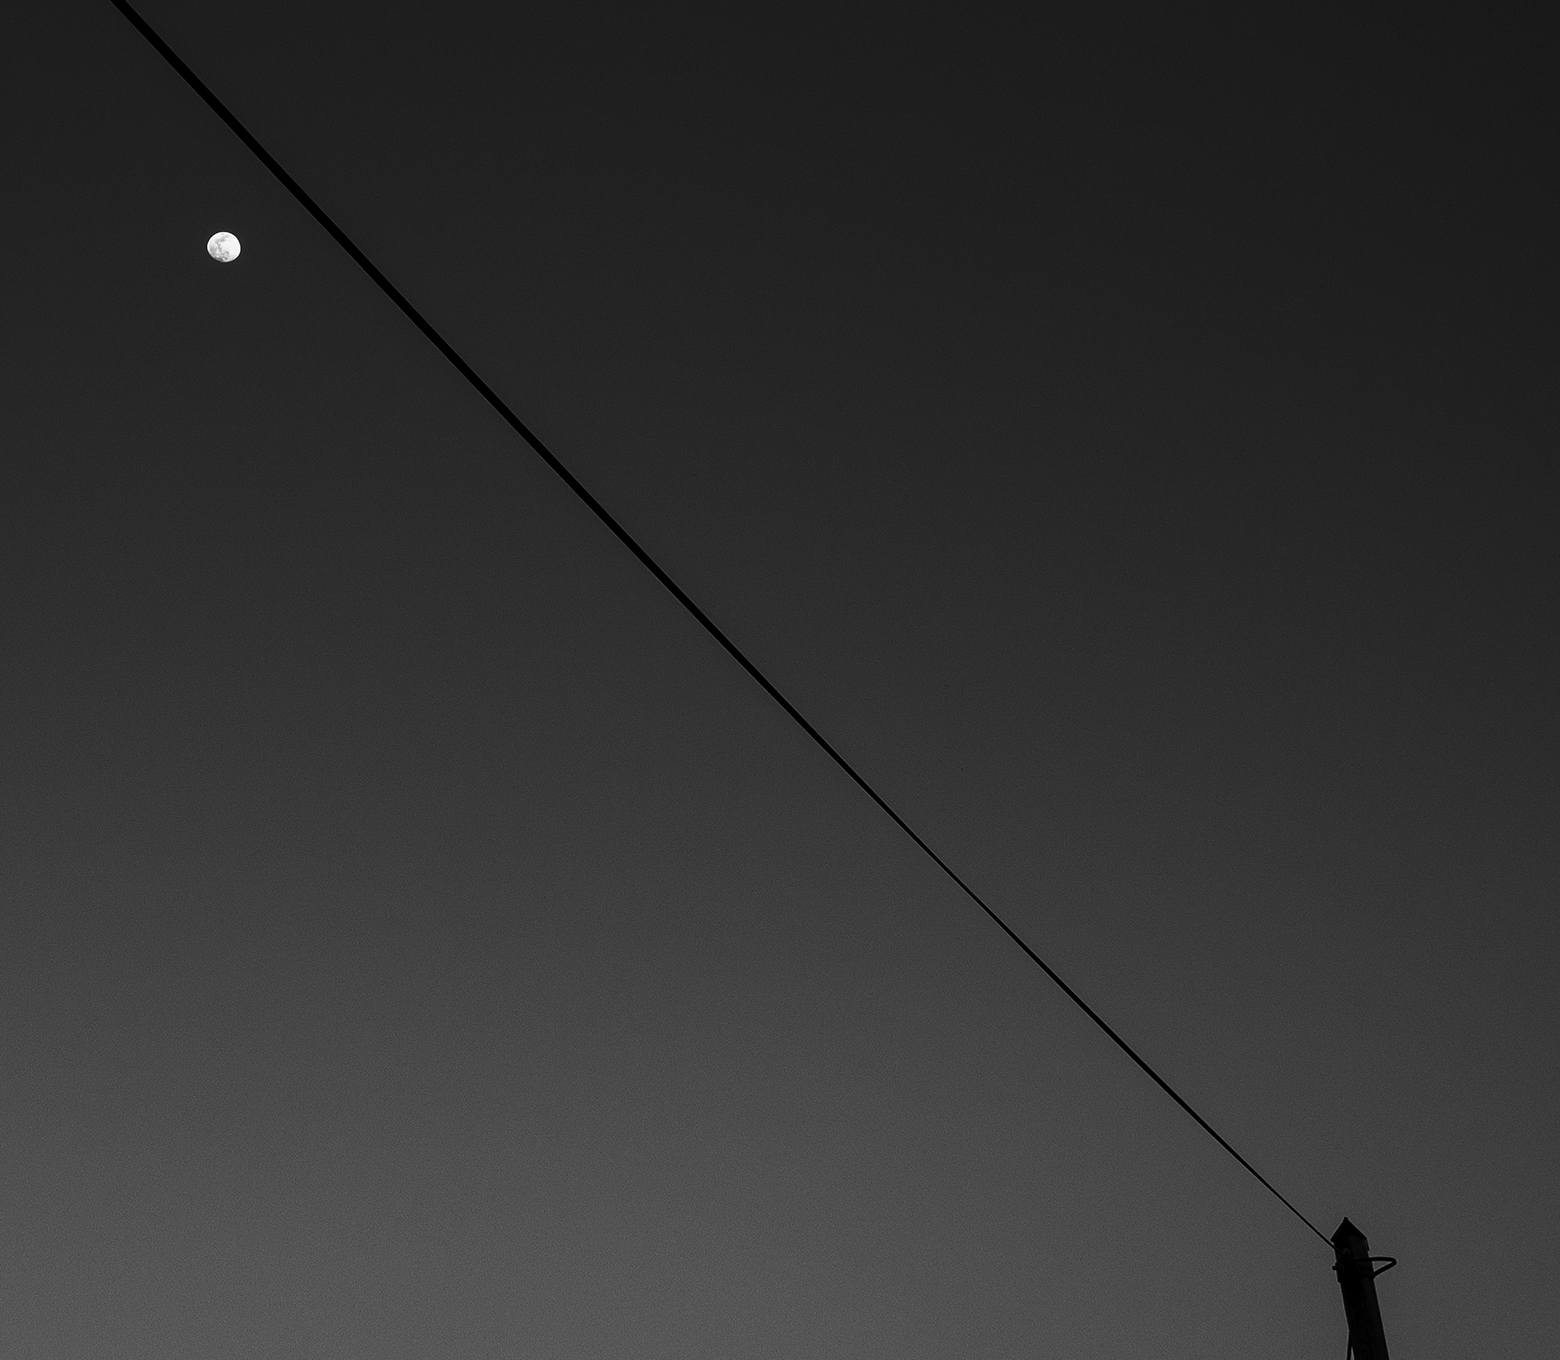 A telephone wire traverses the sky from top left to bottom right where the top of a telephone poll peeks up. The only object in the night sky is a tiny full moon under the telephone wire in the upper-left corner.